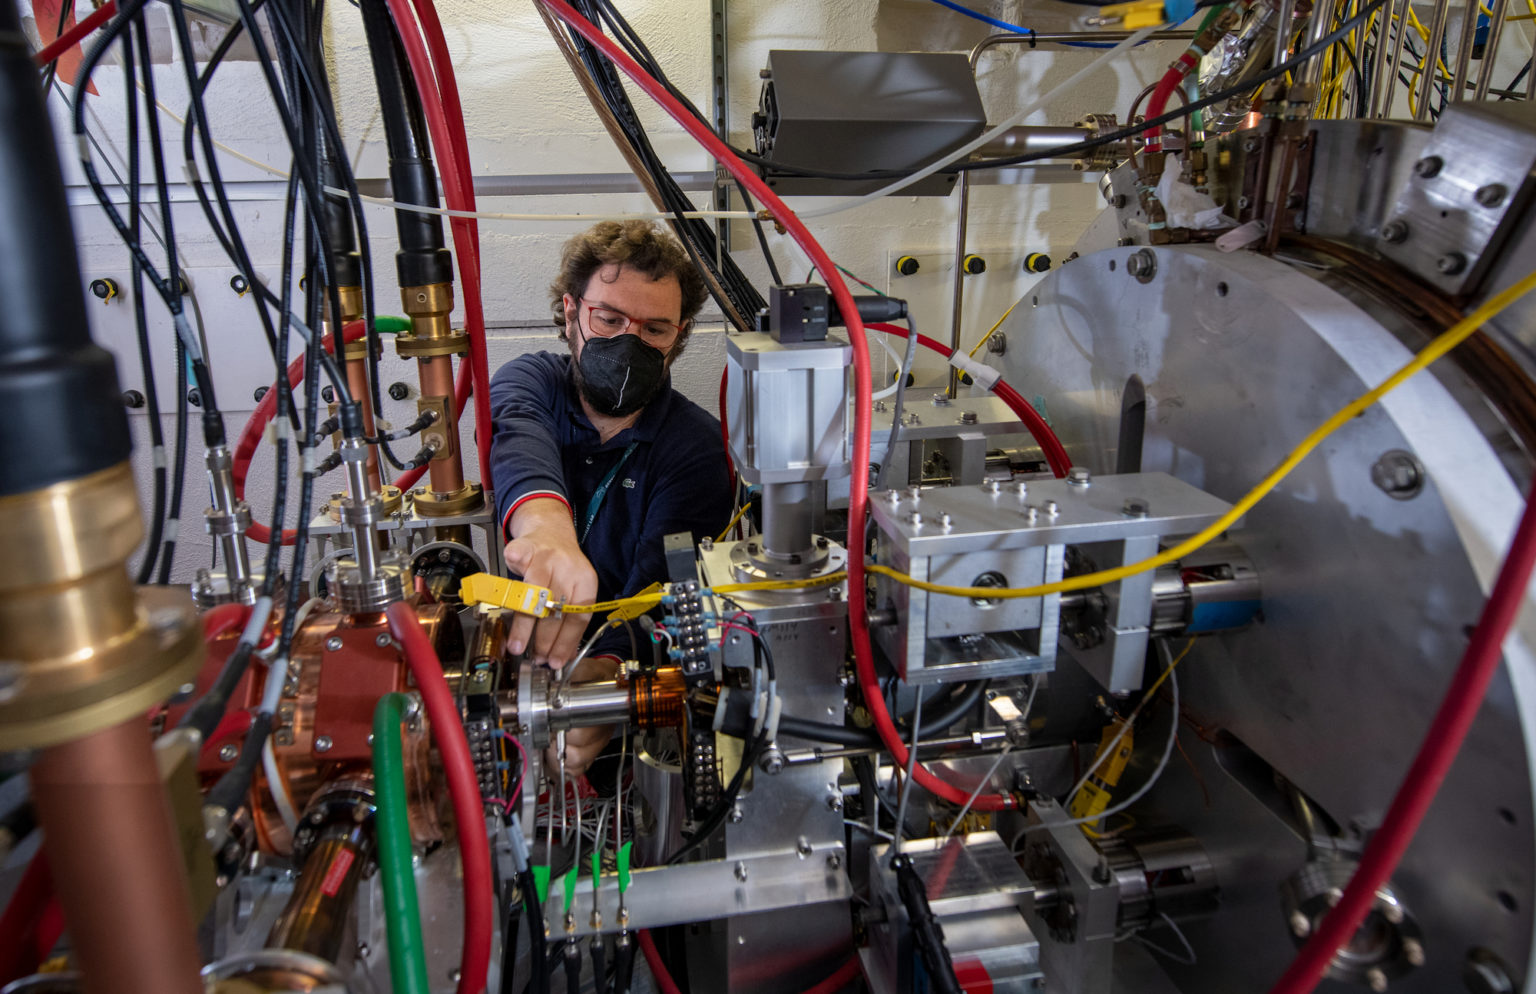 A scientist works on a high repetition-rate electron scattering apparatus in the lab.